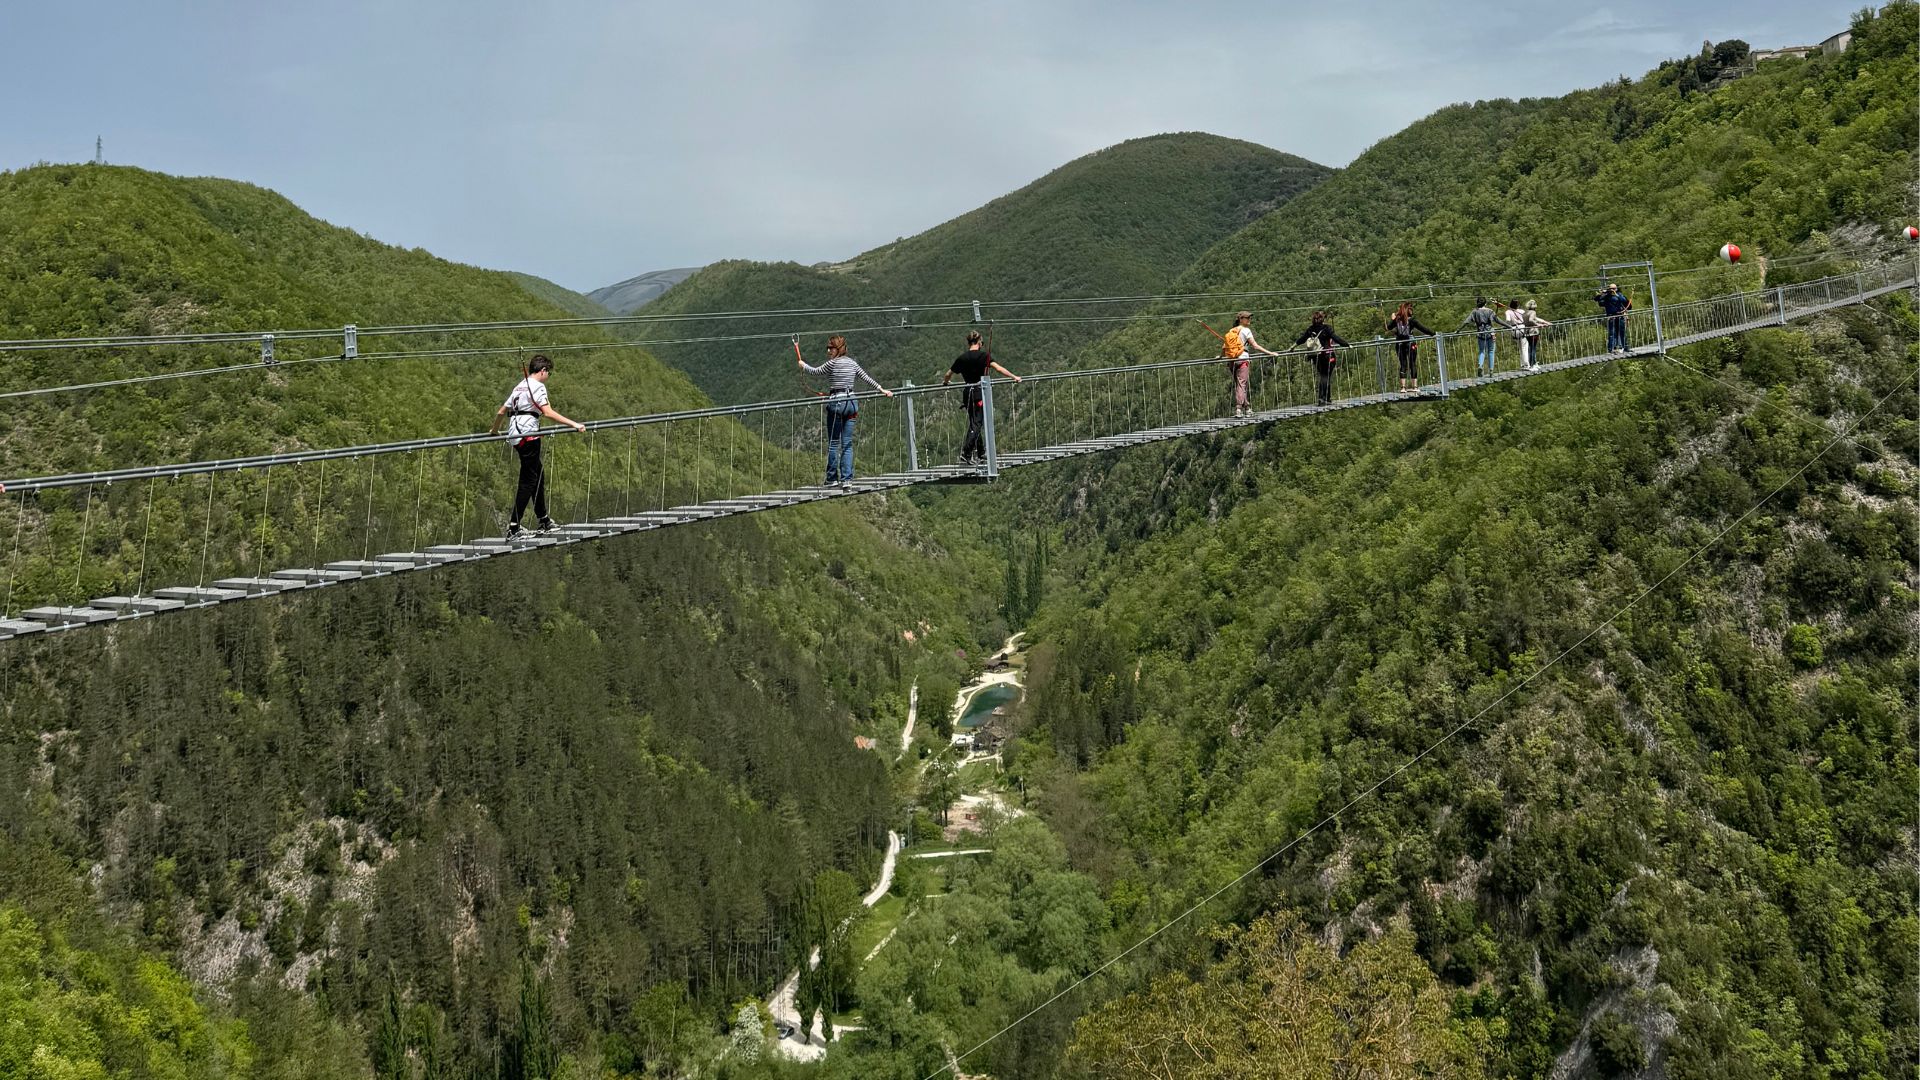 Sellano's residents are hoping a new suspension bridge will attract visitors looking for some adventure. /Hermione Kitson/CGTN 